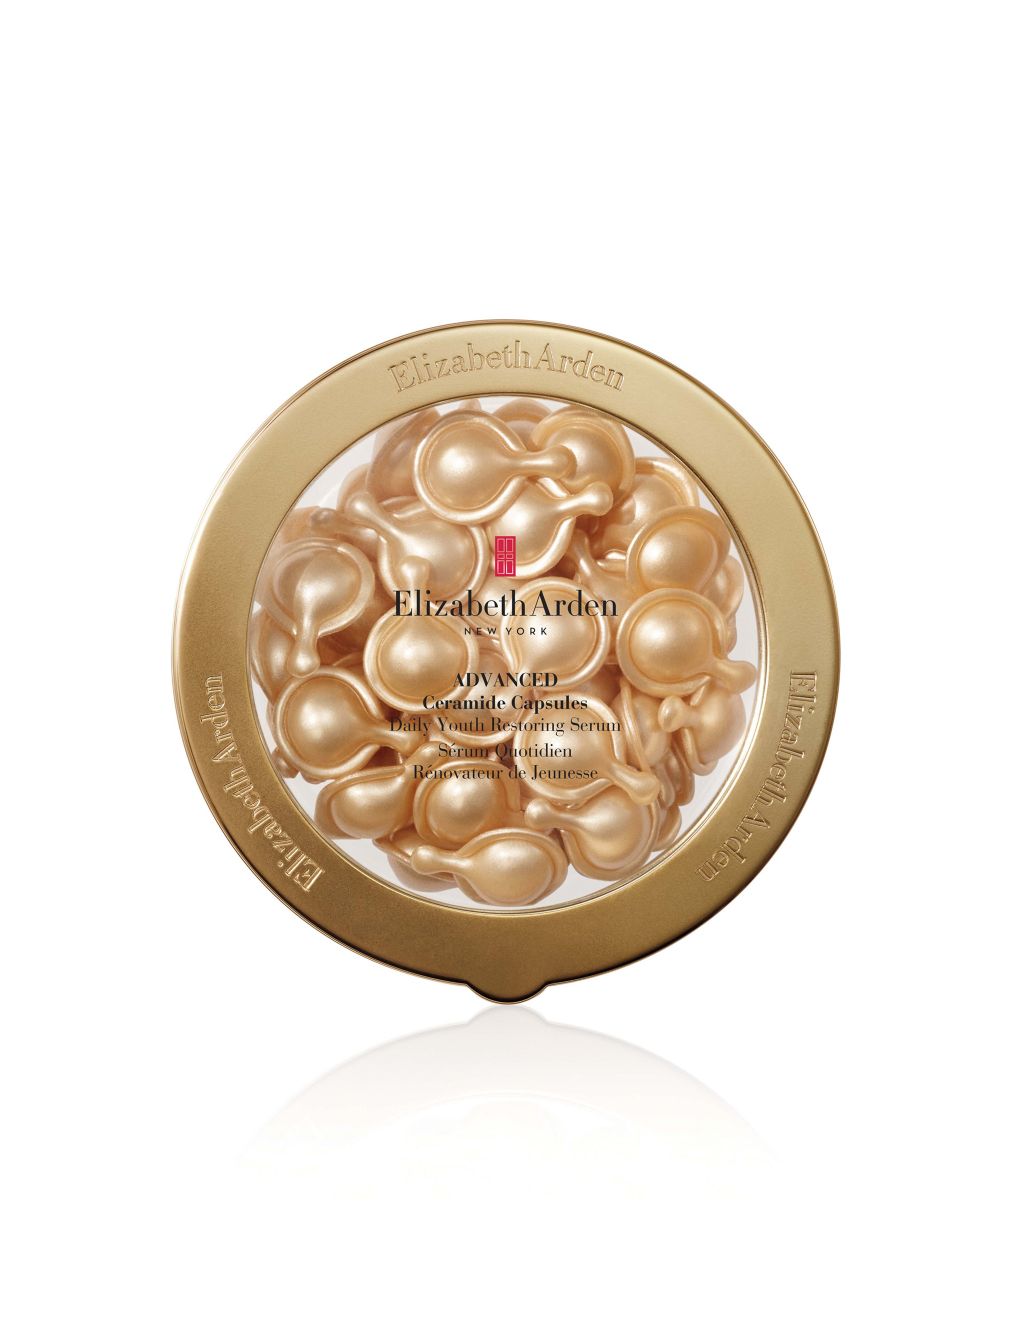 Advanced Ceramide Capsules Daily Youth Restoring Serum 60 Piece 2 of 9